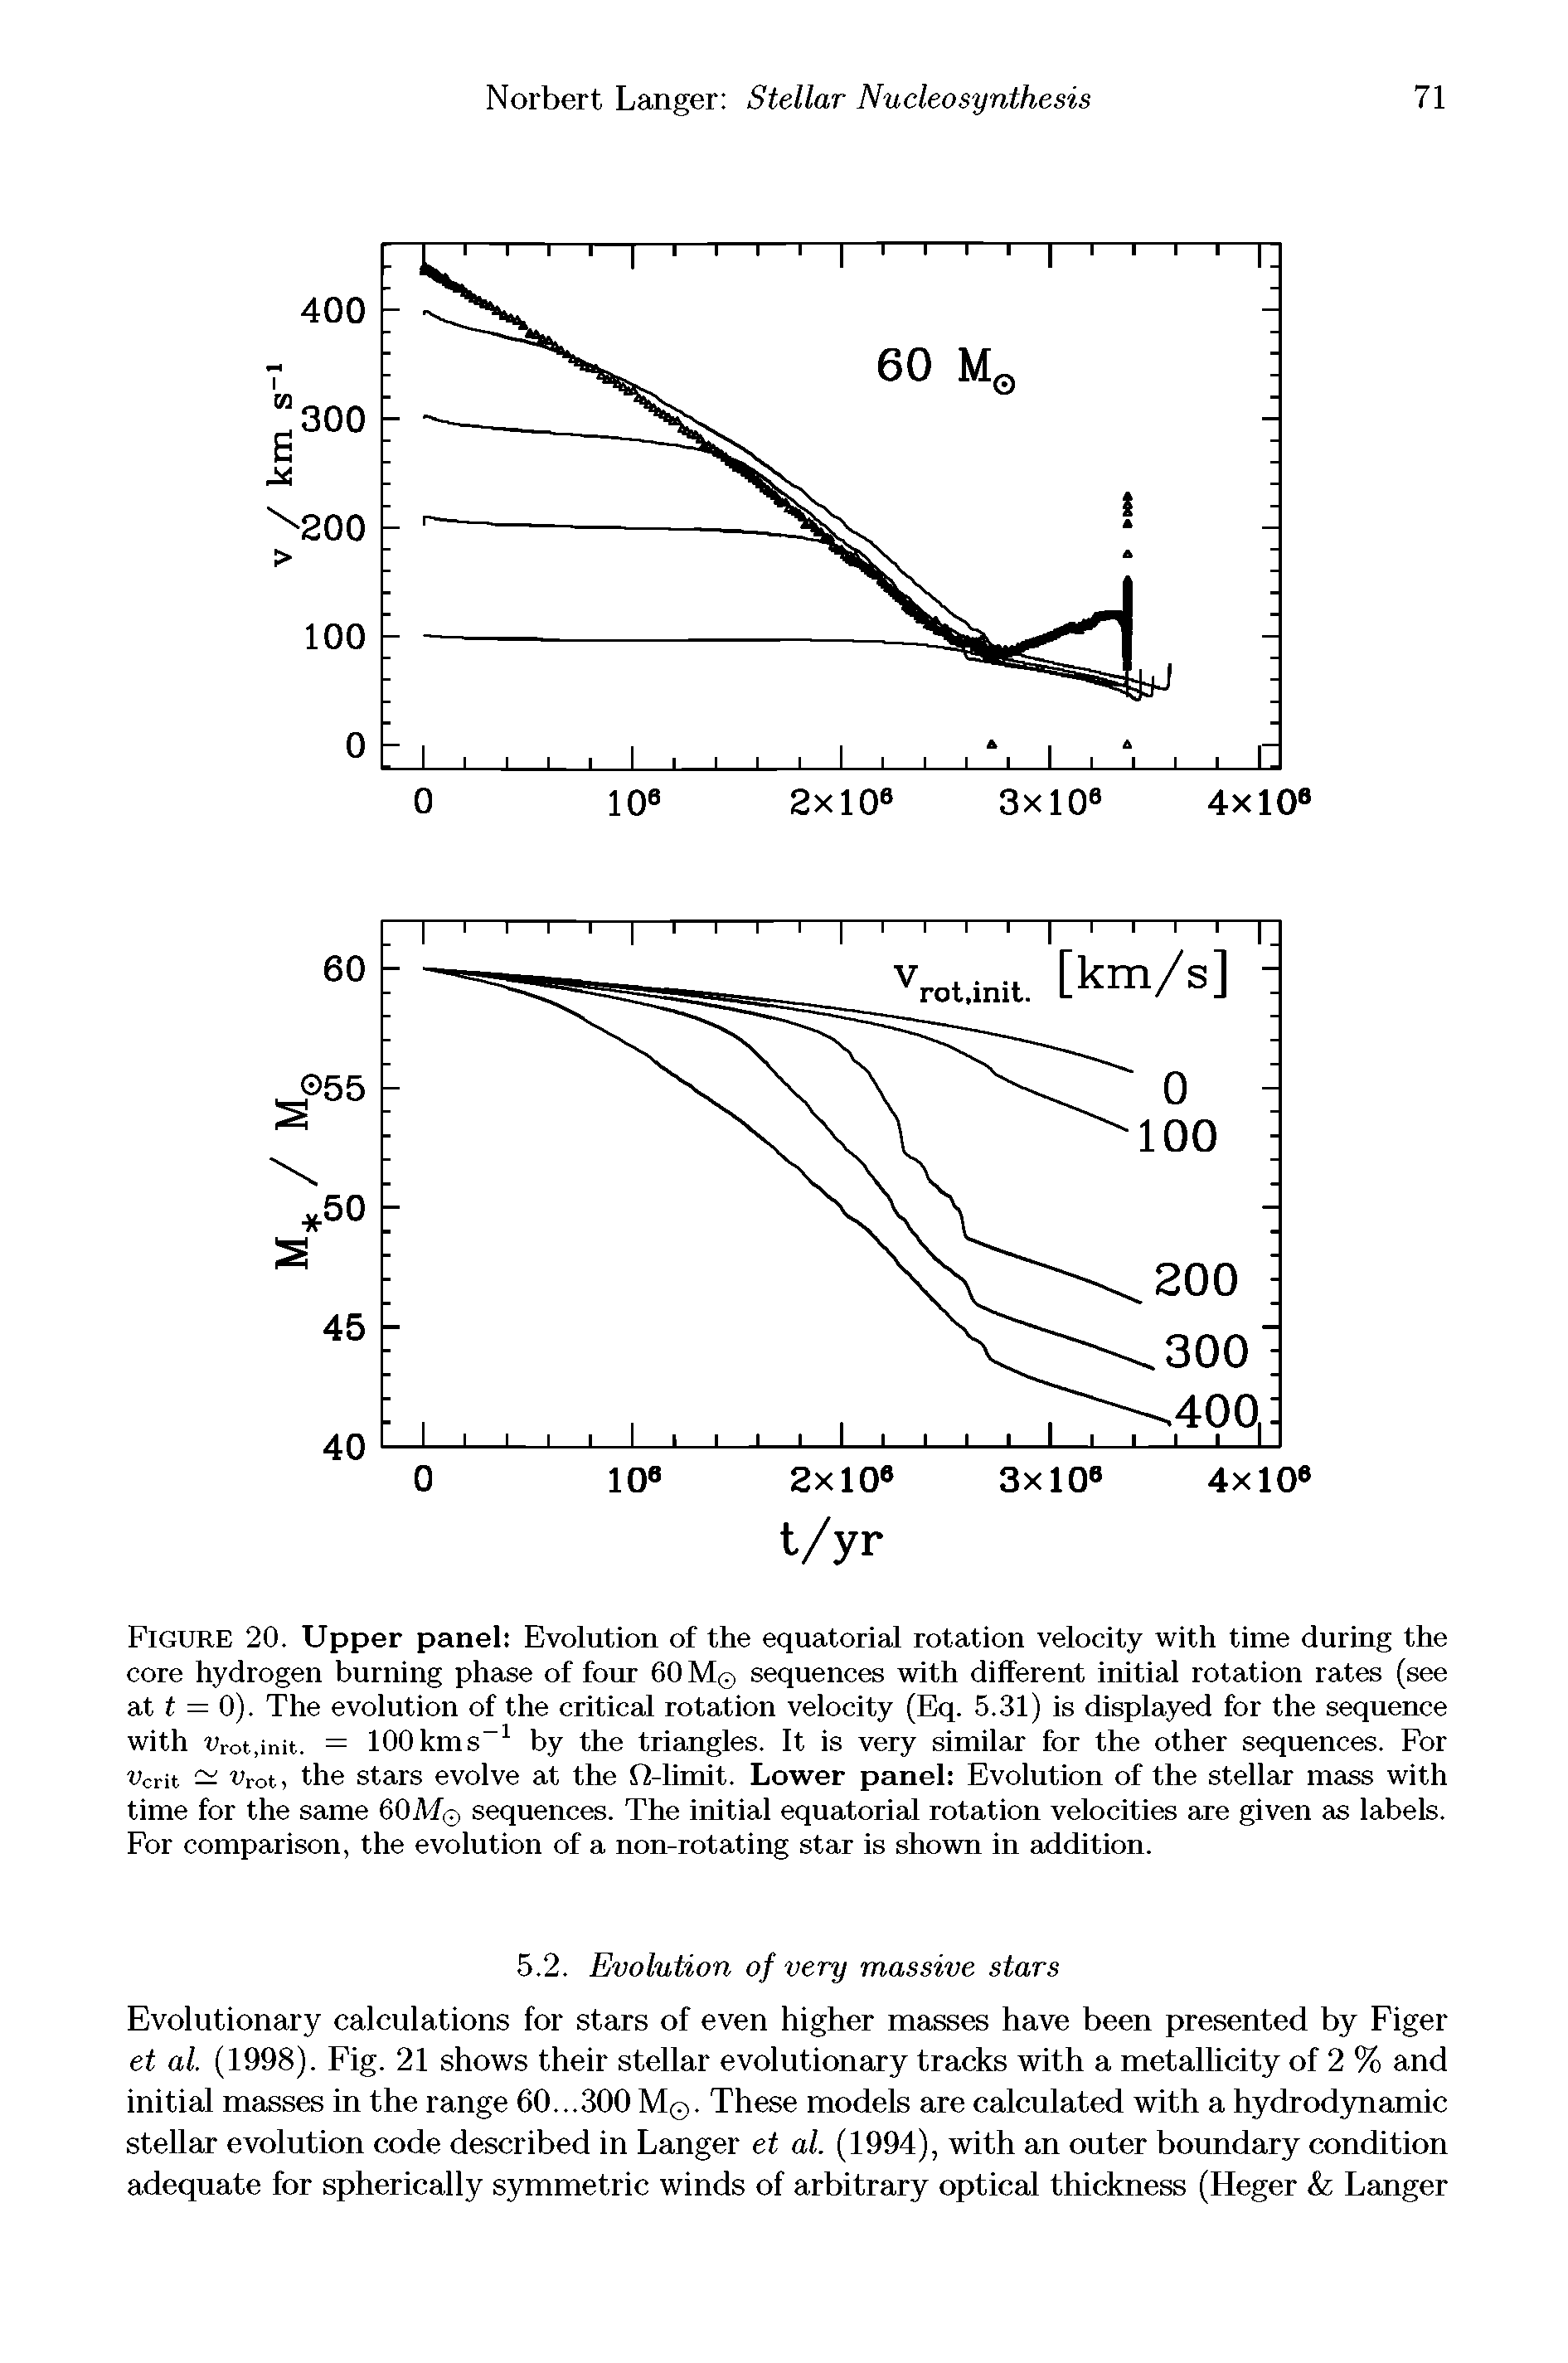 Figure 20. Upper panel Evolution of the equatorial rotation velocity with time during the core hydrogen burning phase of four 60 M sequences with different initial rotation rates (see at t = 0). The evolution of the critical rotation velocity (Eq. 5.31) is displayed for the sequence with Vrot.init. = 100 kms-1 by the triangles. It is very similar for the other sequences. For Vcrit — ( rot, the stars evolve at the Q-limit. Lower panel Evolution of the stellar mass with time for the same 60M sequences. The initial equatorial rotation velocities are given as labels. For comparison, the evolution of a non-rotating star is shown in addition.